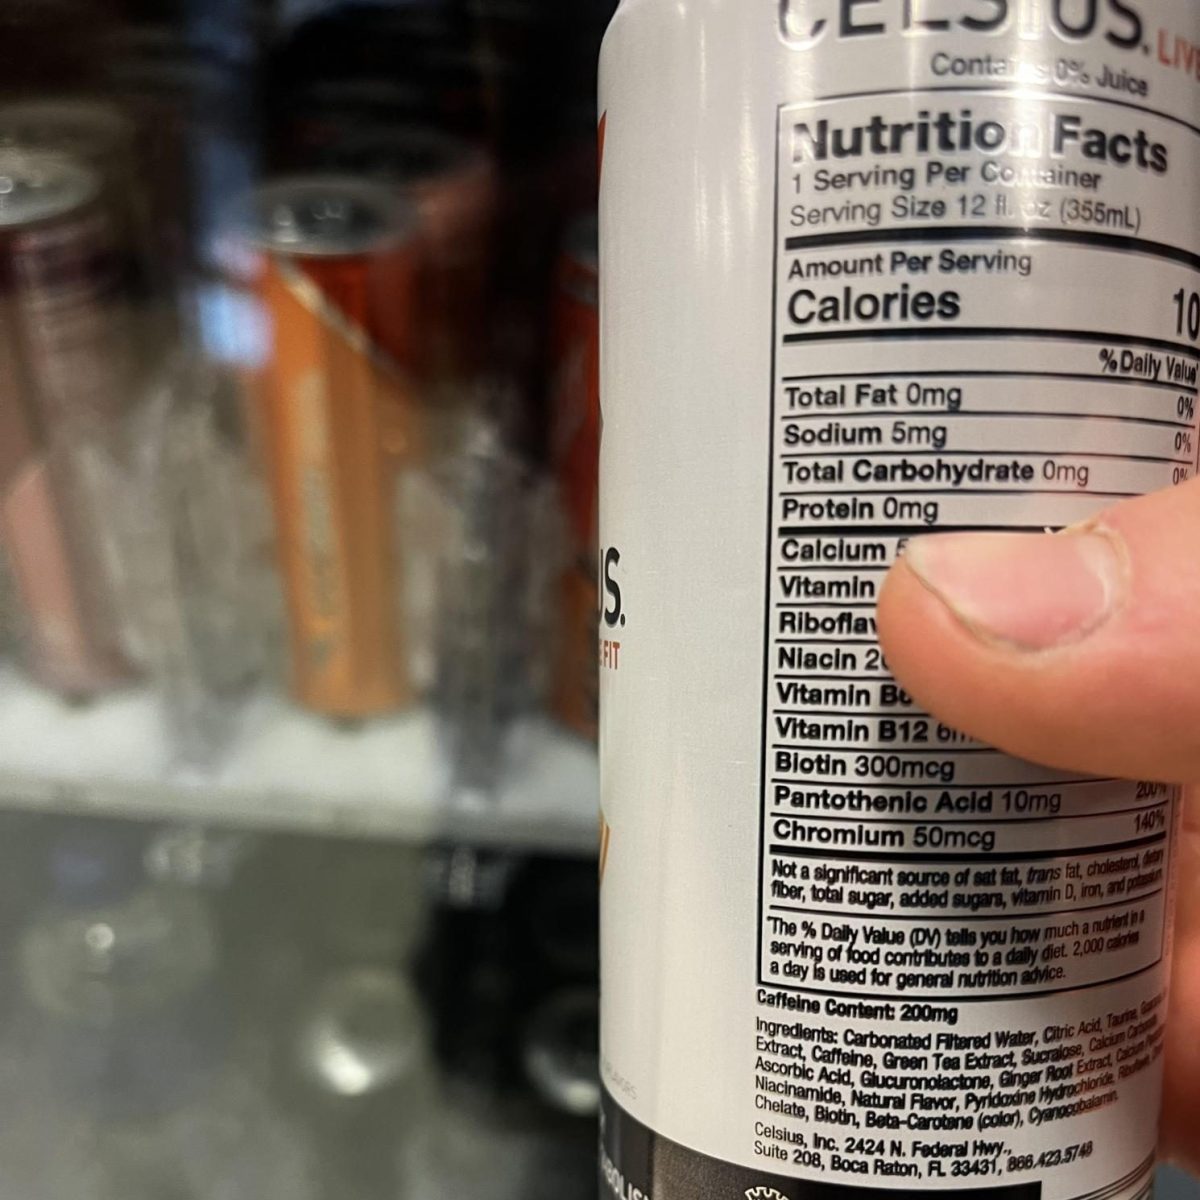 A Celsius energy drink is being sold in a high school vending machine, which has twice the healthy limit of caffeine for teens. There is no warning label on it and the caffeine amount listed on it is tiny.